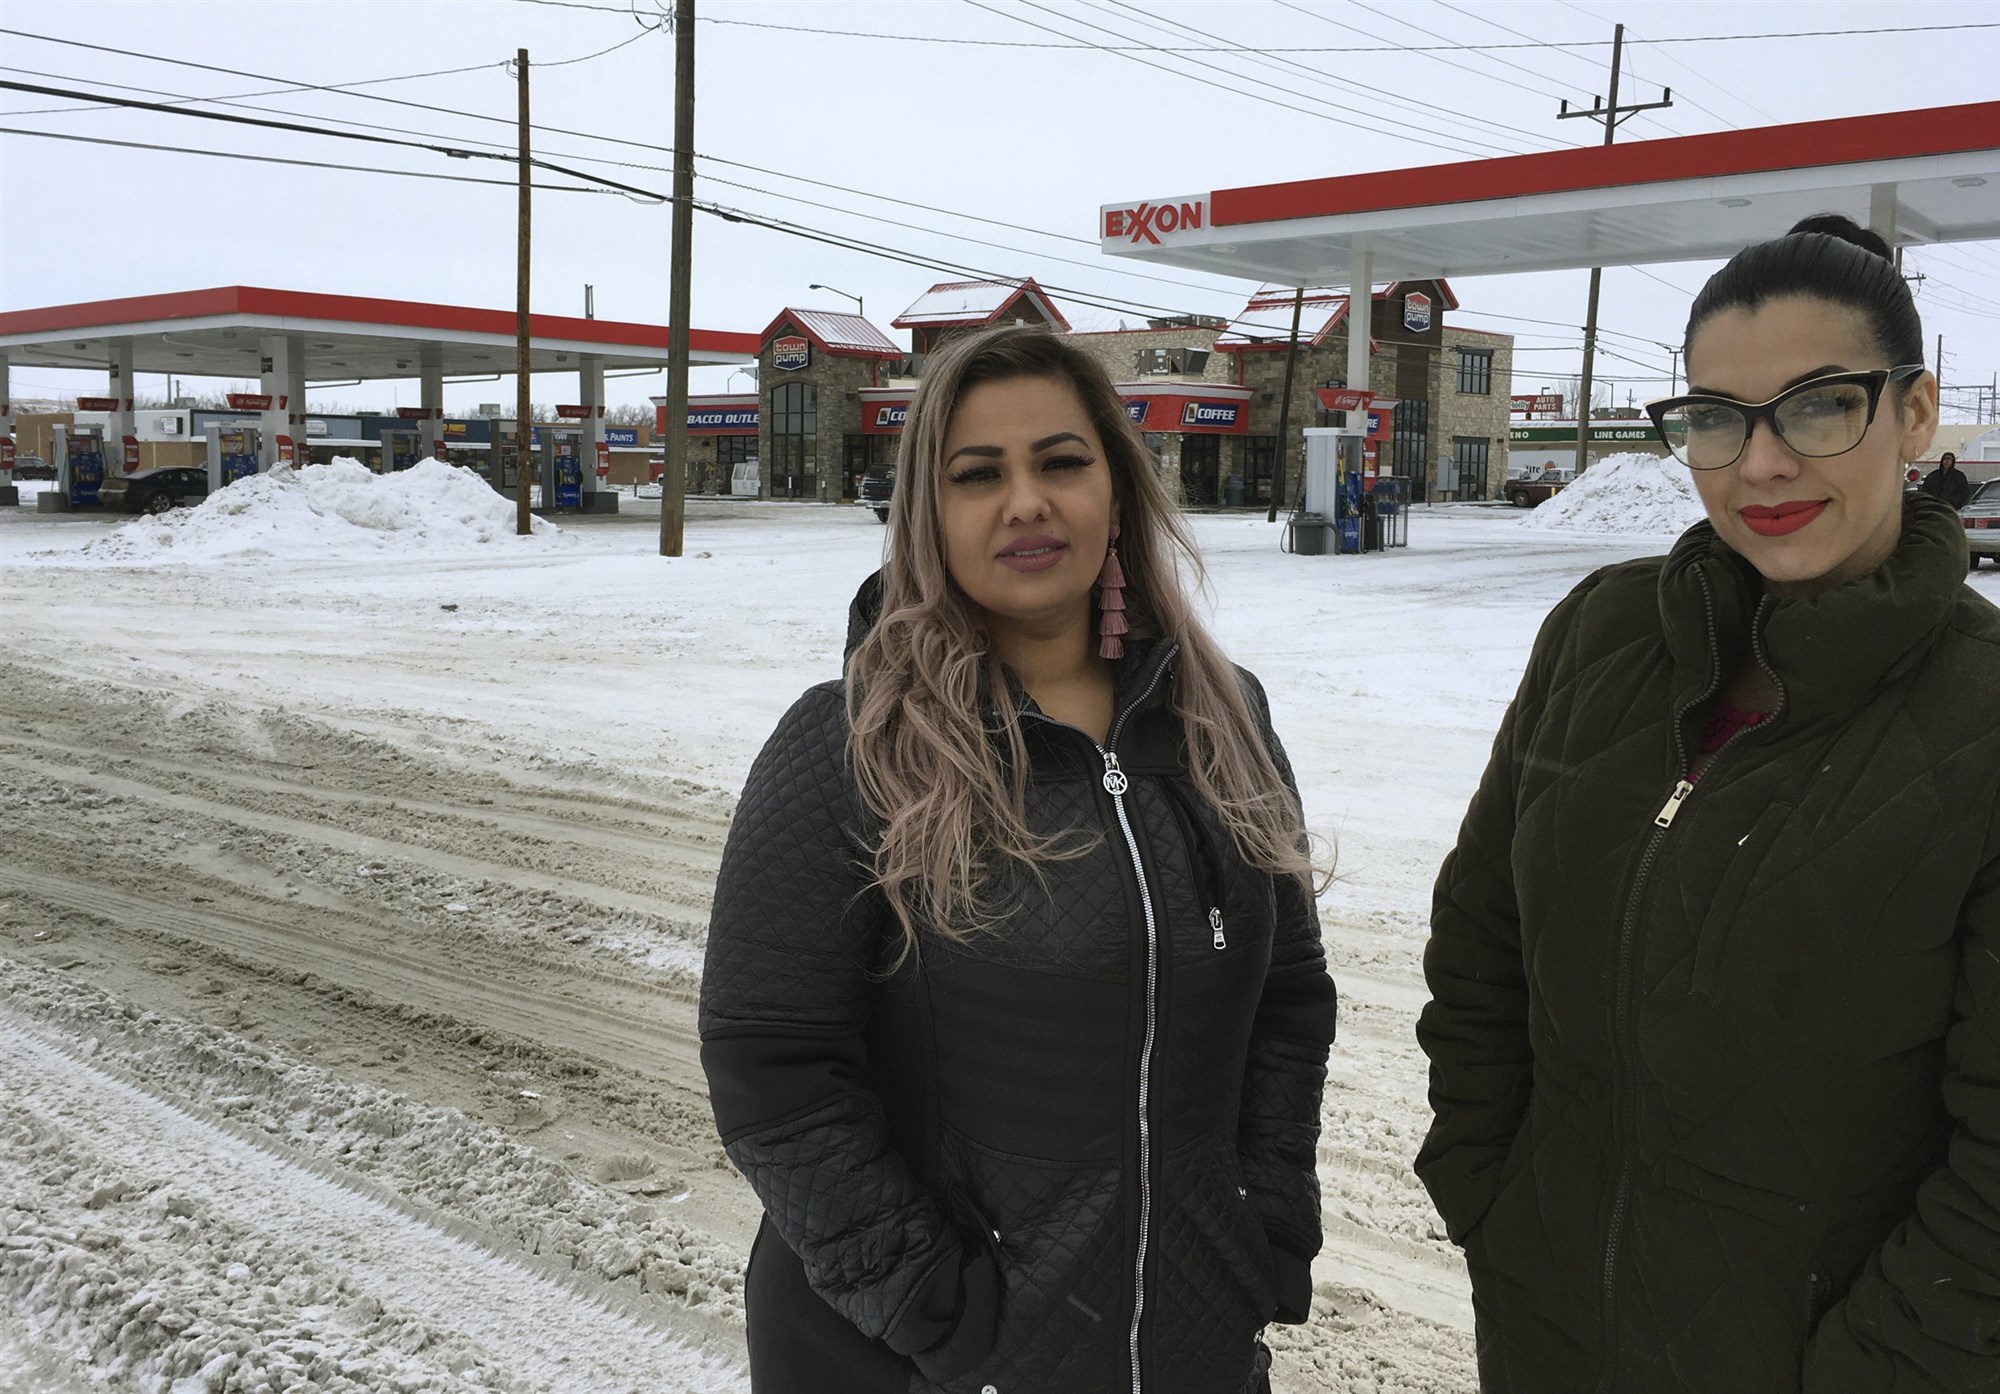 Martha Hernandez and Ana Suda in front of the convenience store where they were detained by a U.S. Border Patrol agent for speaking Spanish in Havre, Mont. The women sued the government and the border agent.Brooke Swaney / ACLU of Montana via AP file